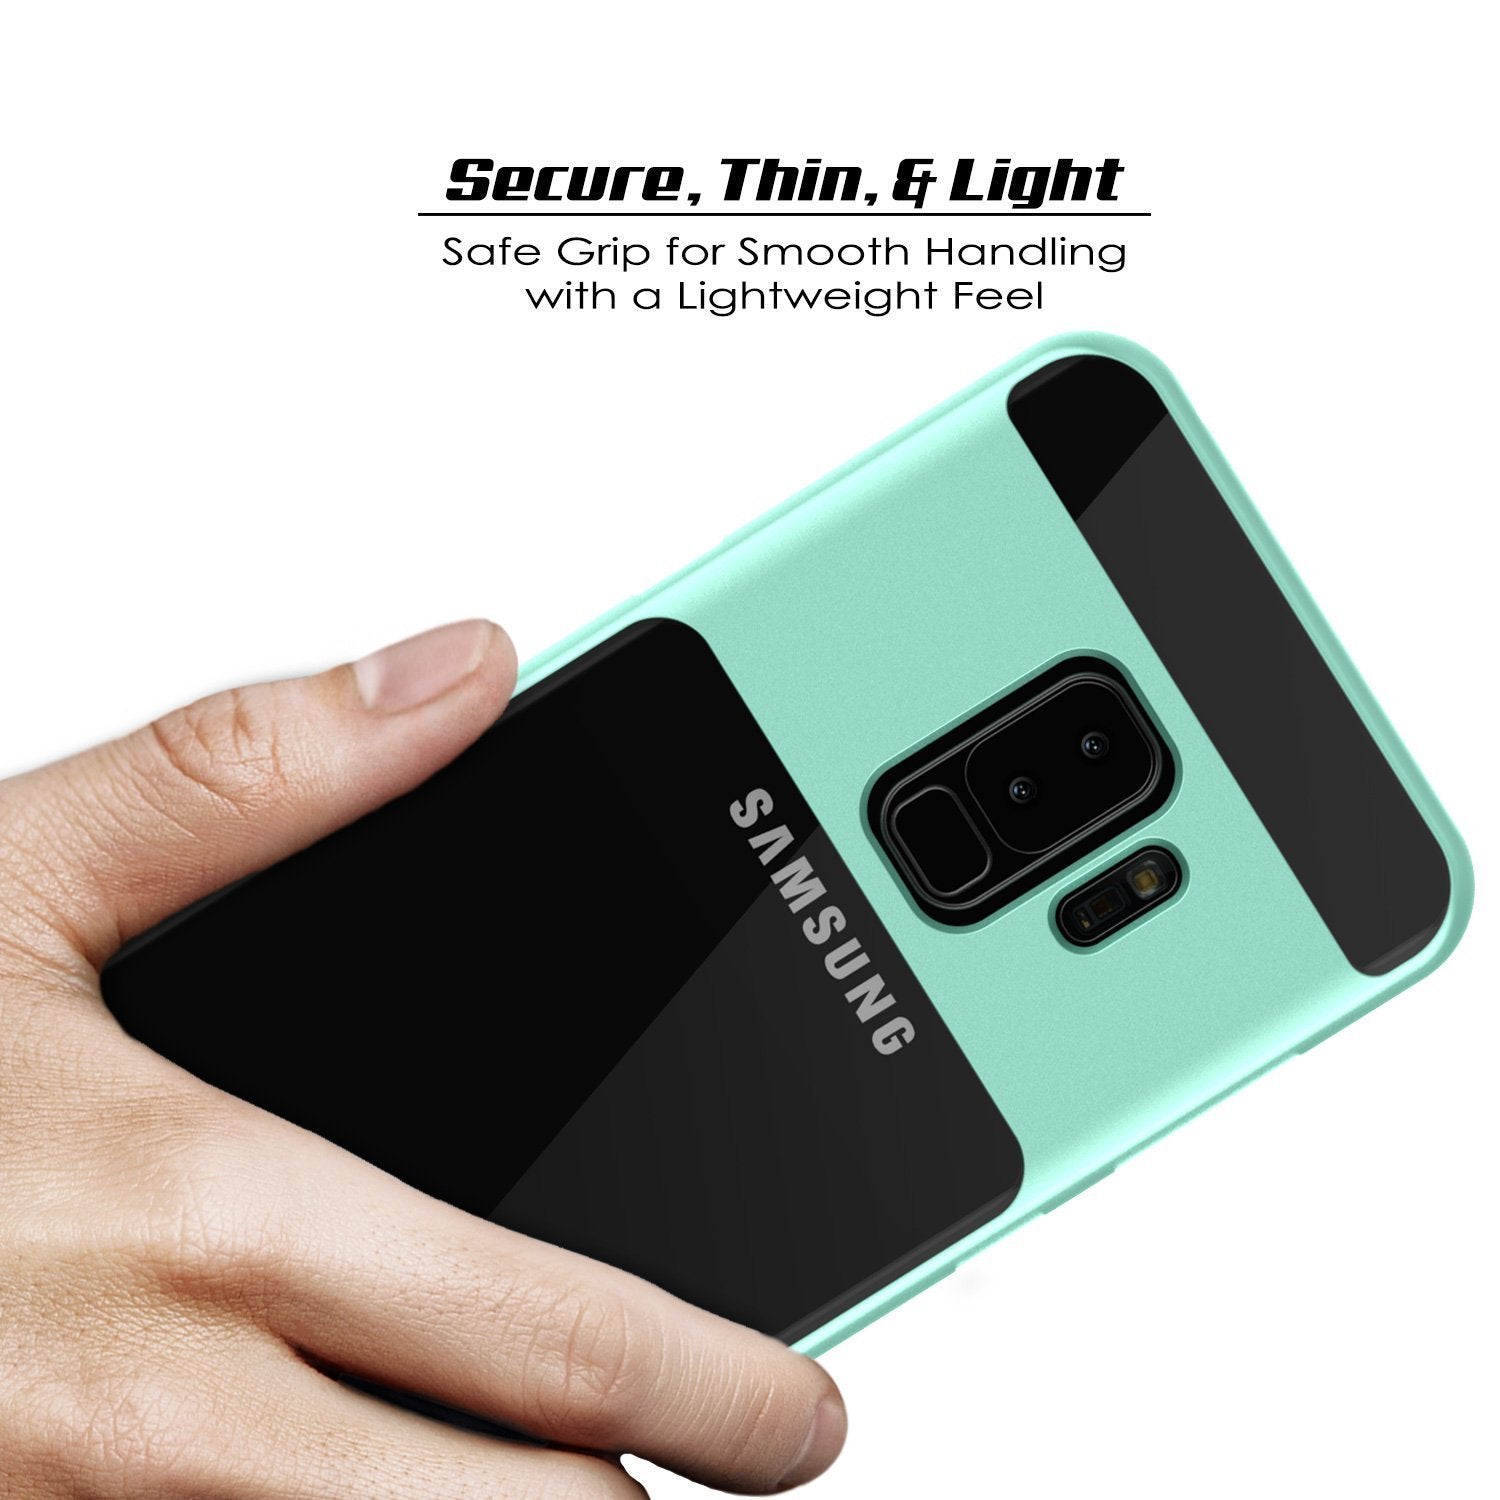 Galaxy S9+ Plus Case, PUNKcase [LUCID 3.0 Series] [Slim Fit] [Clear Back] Armor Cover w/ Integrated Kickstand, Anti-Shock System & PUNKSHIELD Screen Protector for Samsung Galaxy S9+ Plus [Teal] - PunkCase NZ